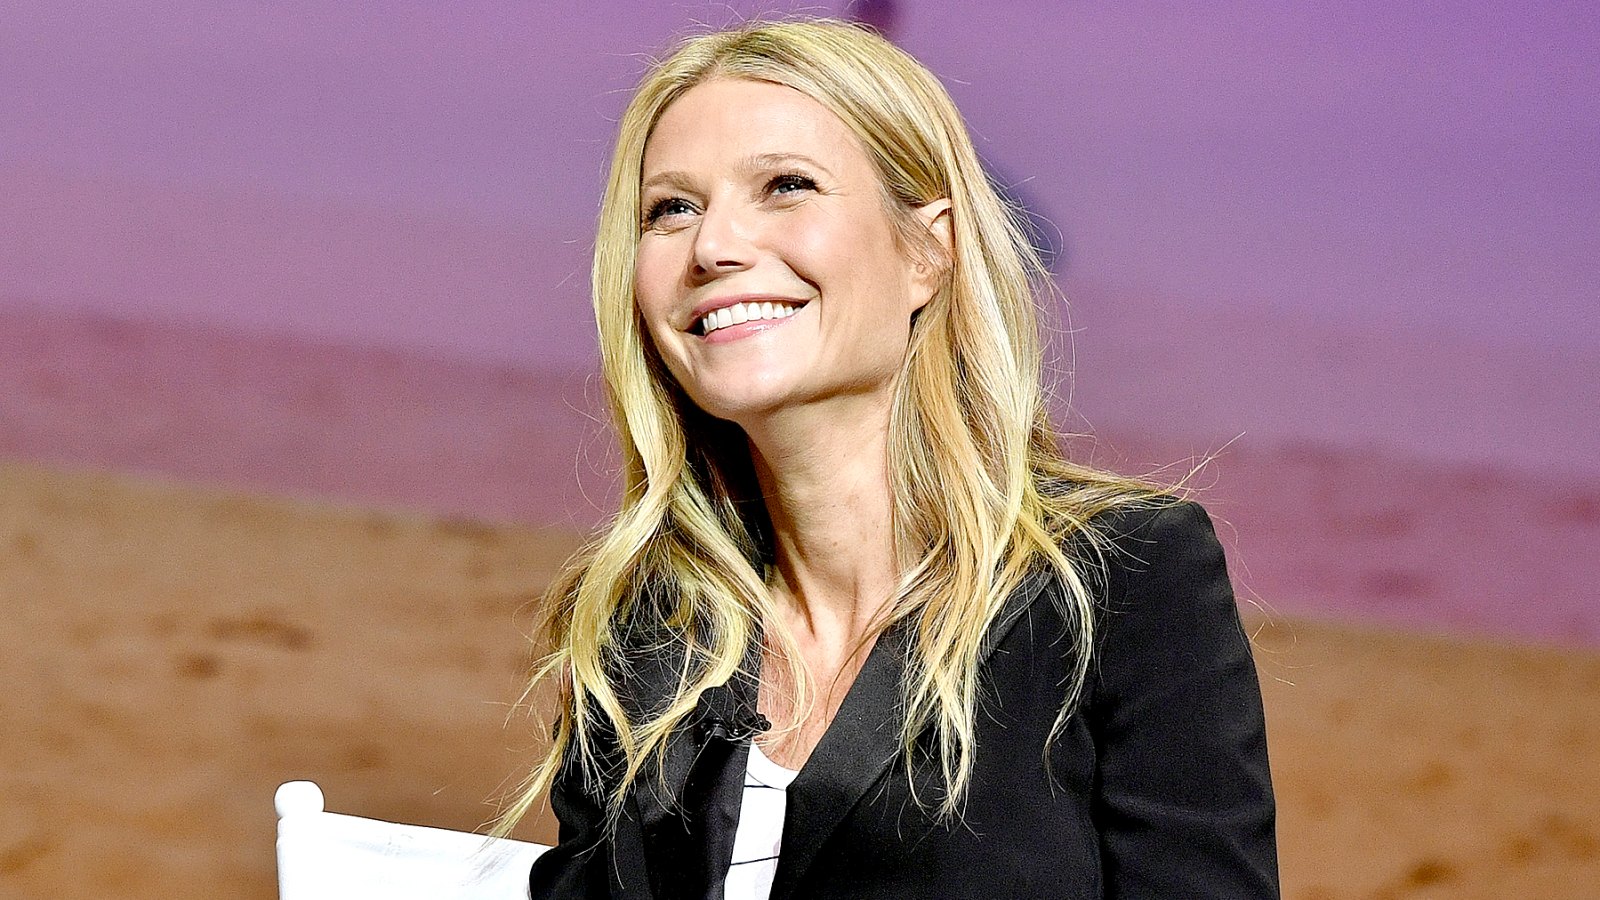 Gwyneth Paltrow speaks onstage at Cultivating the Art of Taste & Style at the Los Angeles Theatre during Airbnb Open LA - Day 3 on November 19, 2016 in Los Angeles, California.